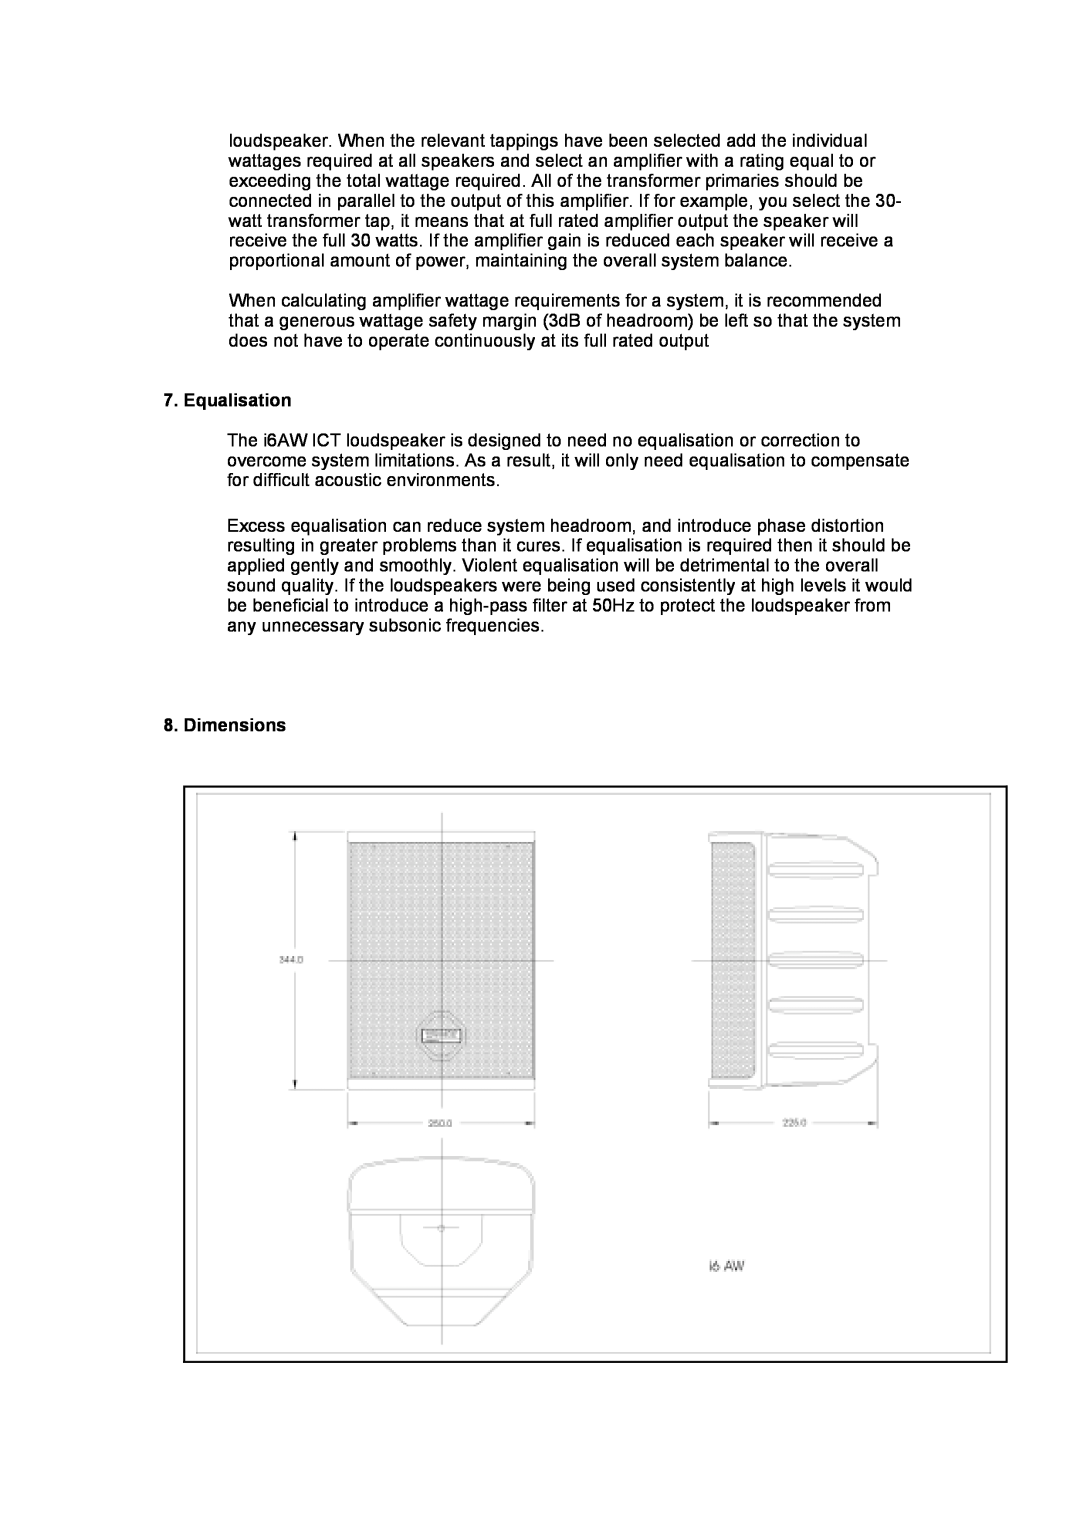 TOA Electronics I6 AW ICT user manual Equalisation, Dimensions 